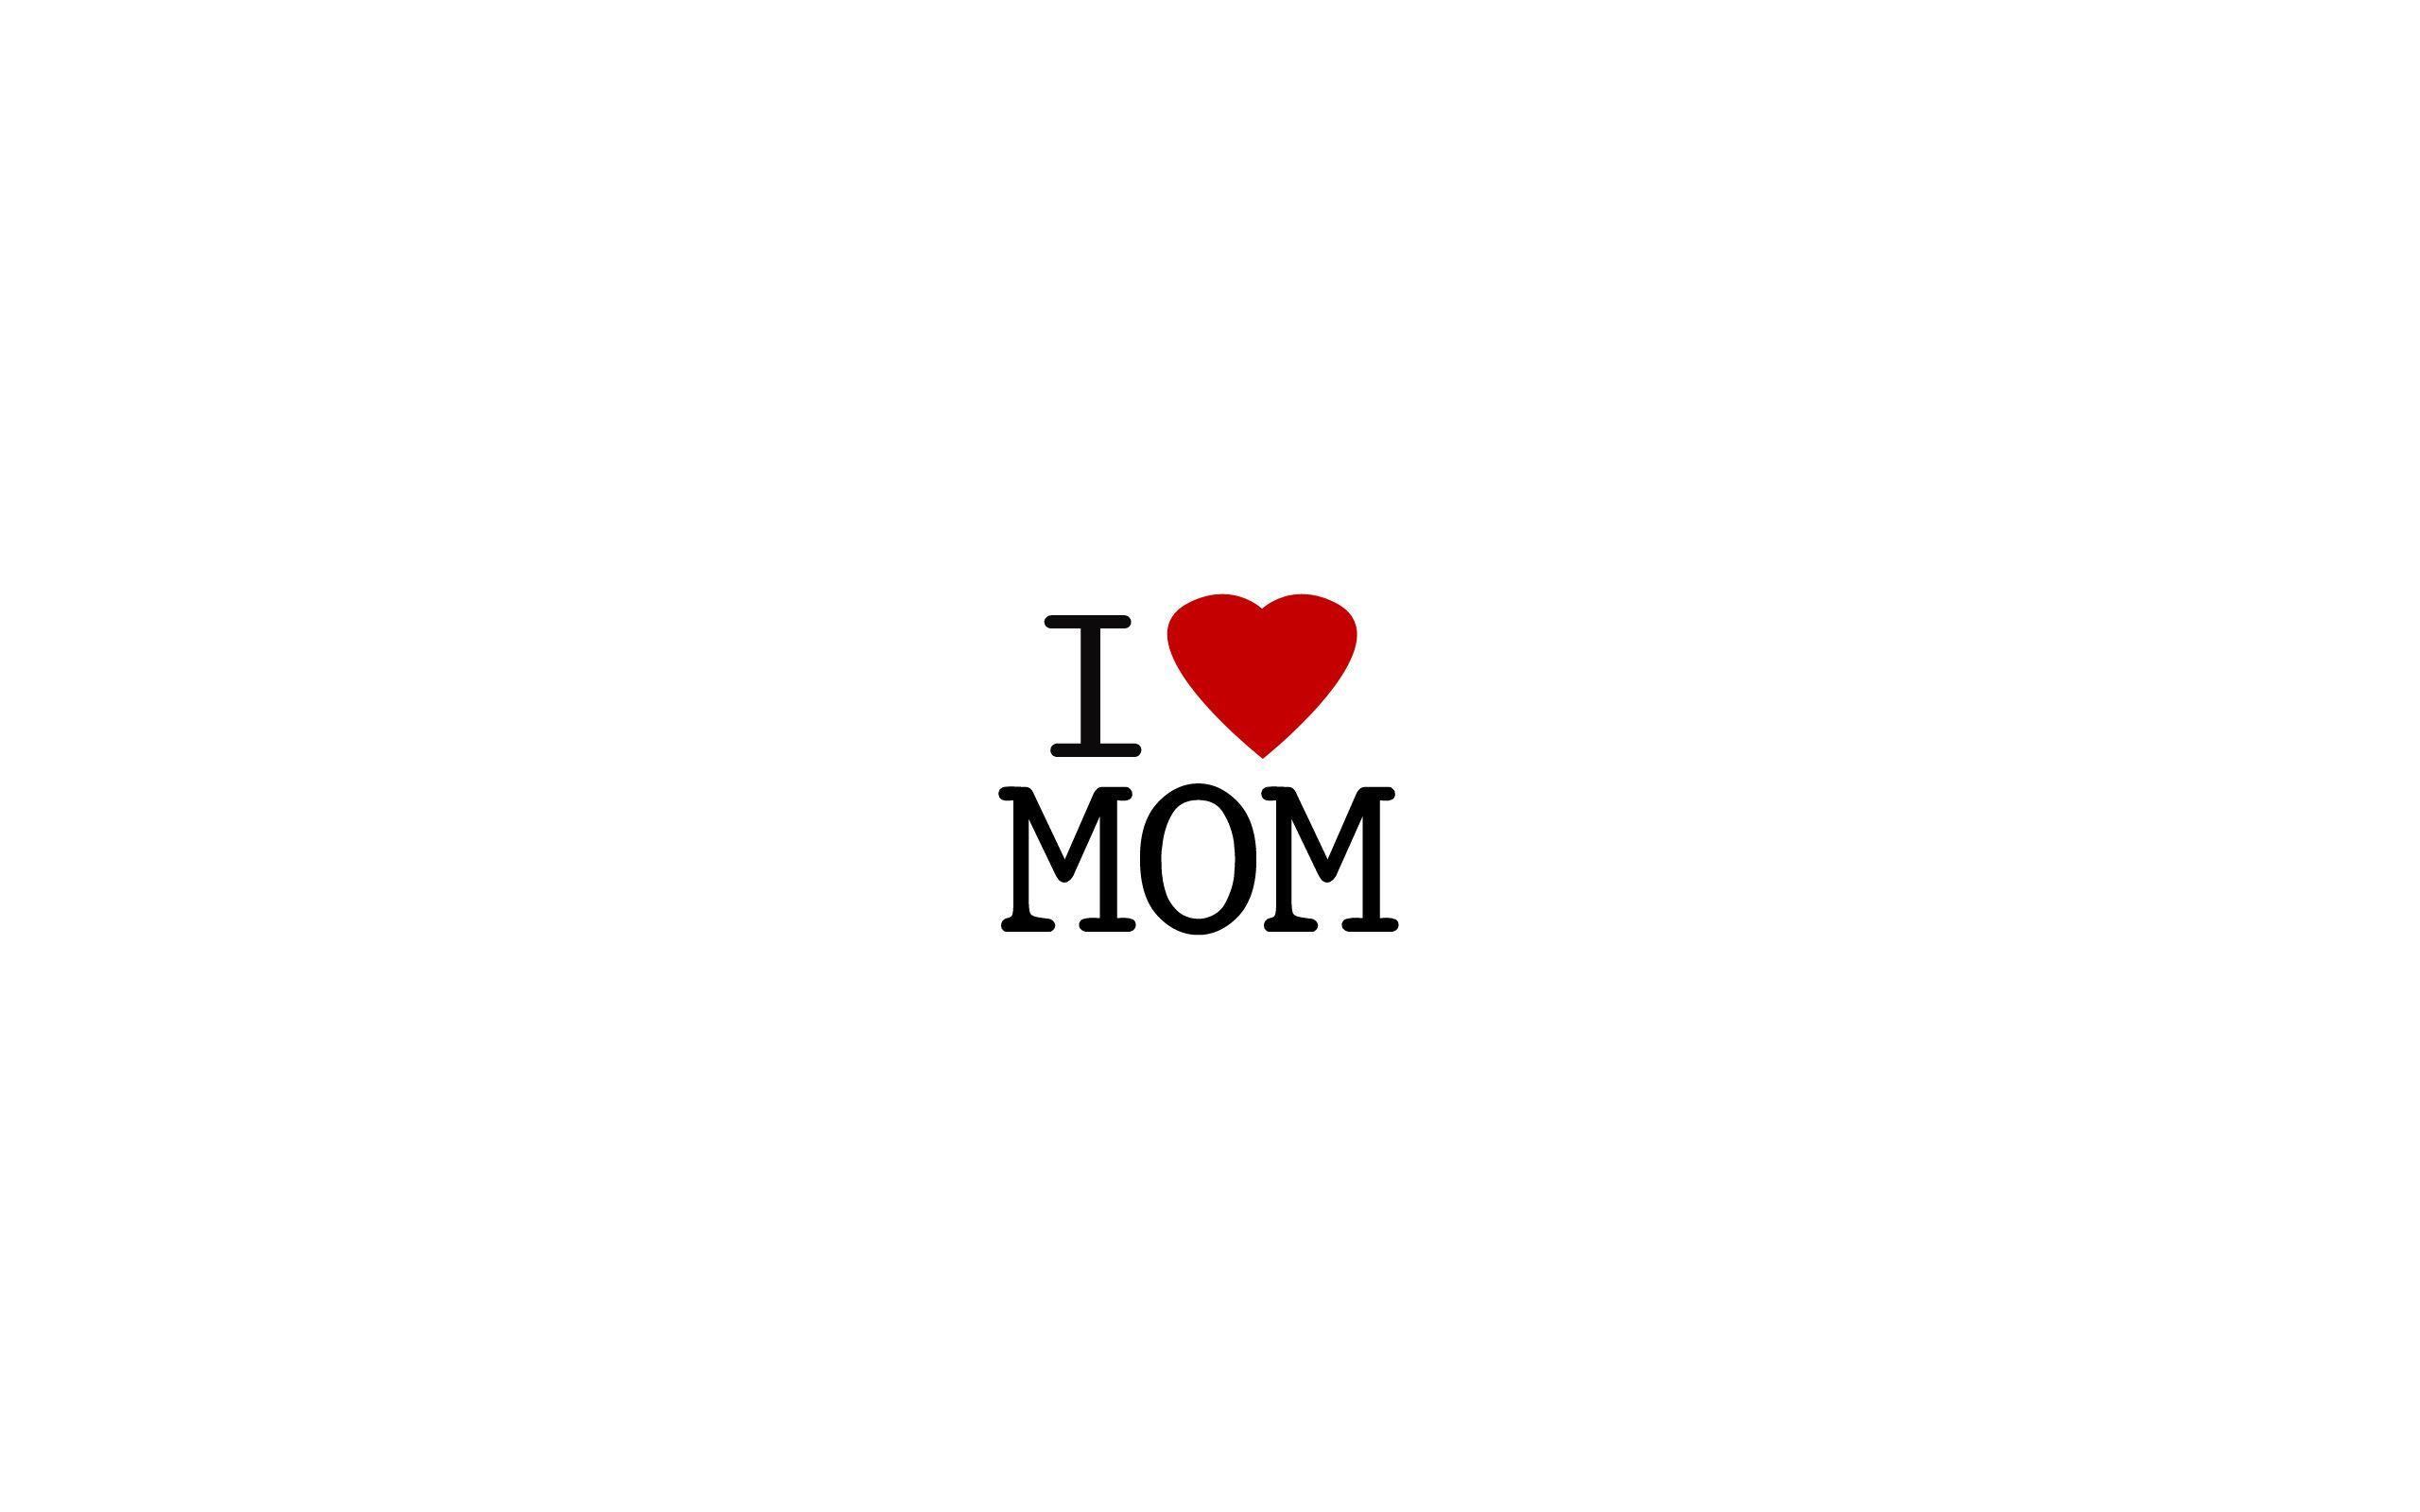 I Love You Mom Wallpapers - Wallpaper Cave